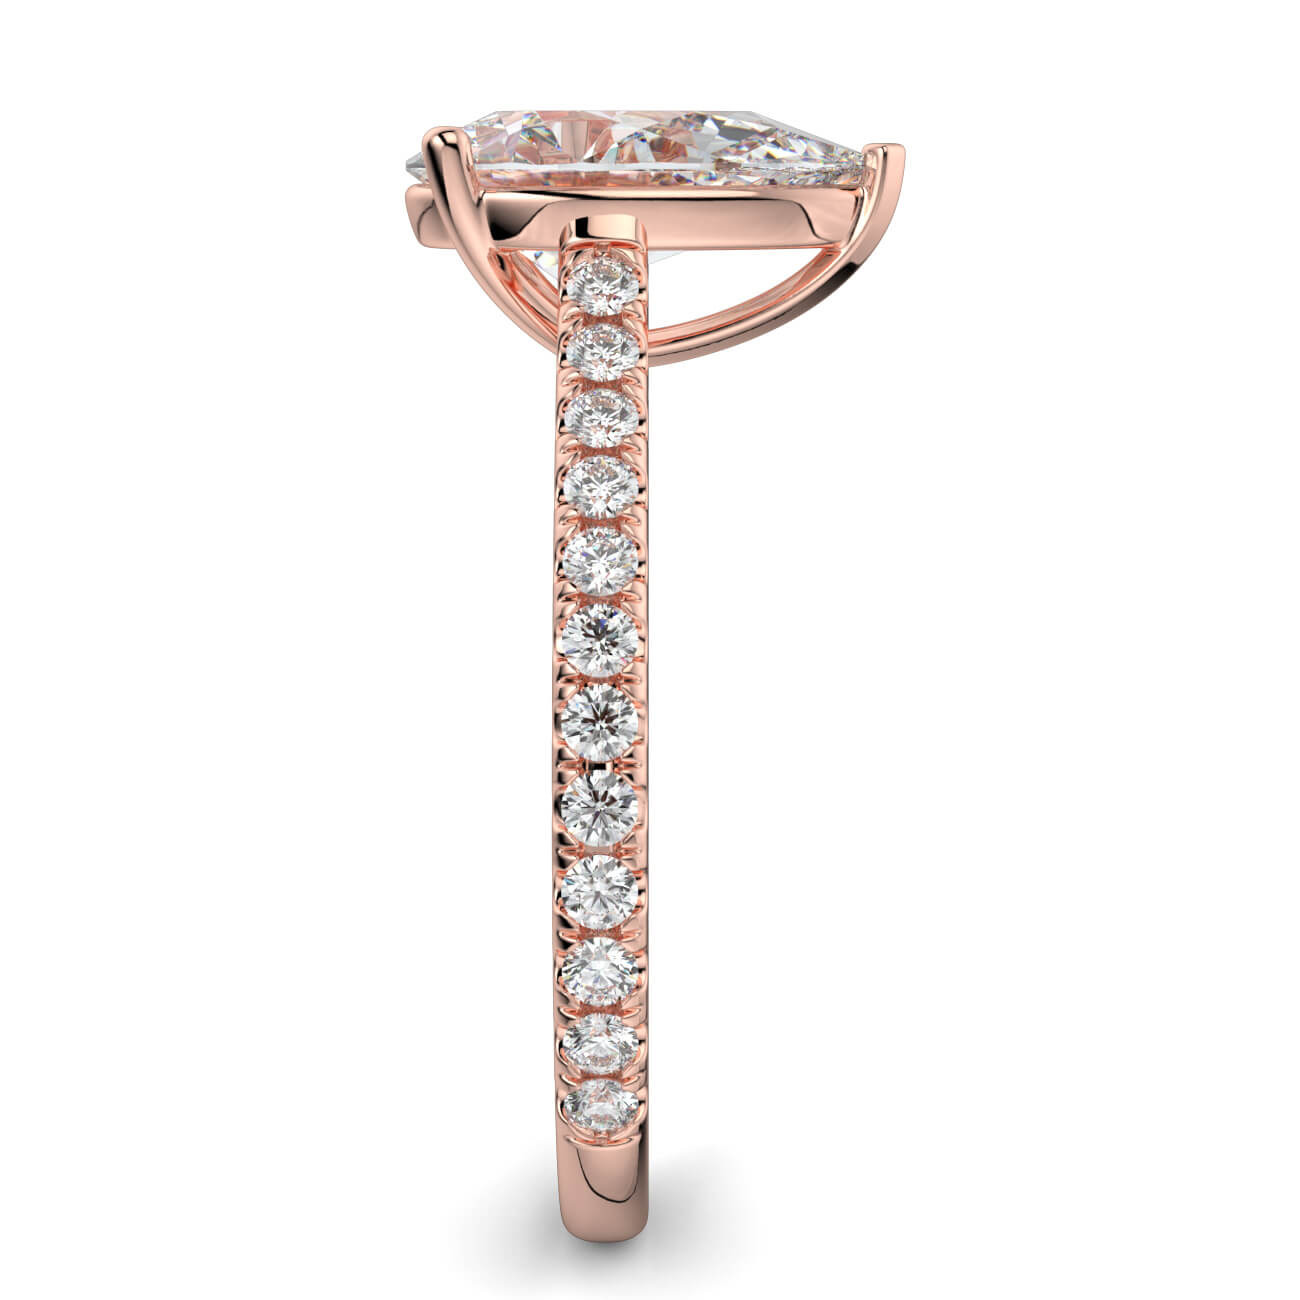 Pear shape diamond cathedral engagement ring in rose gold – Australian Diamond Network